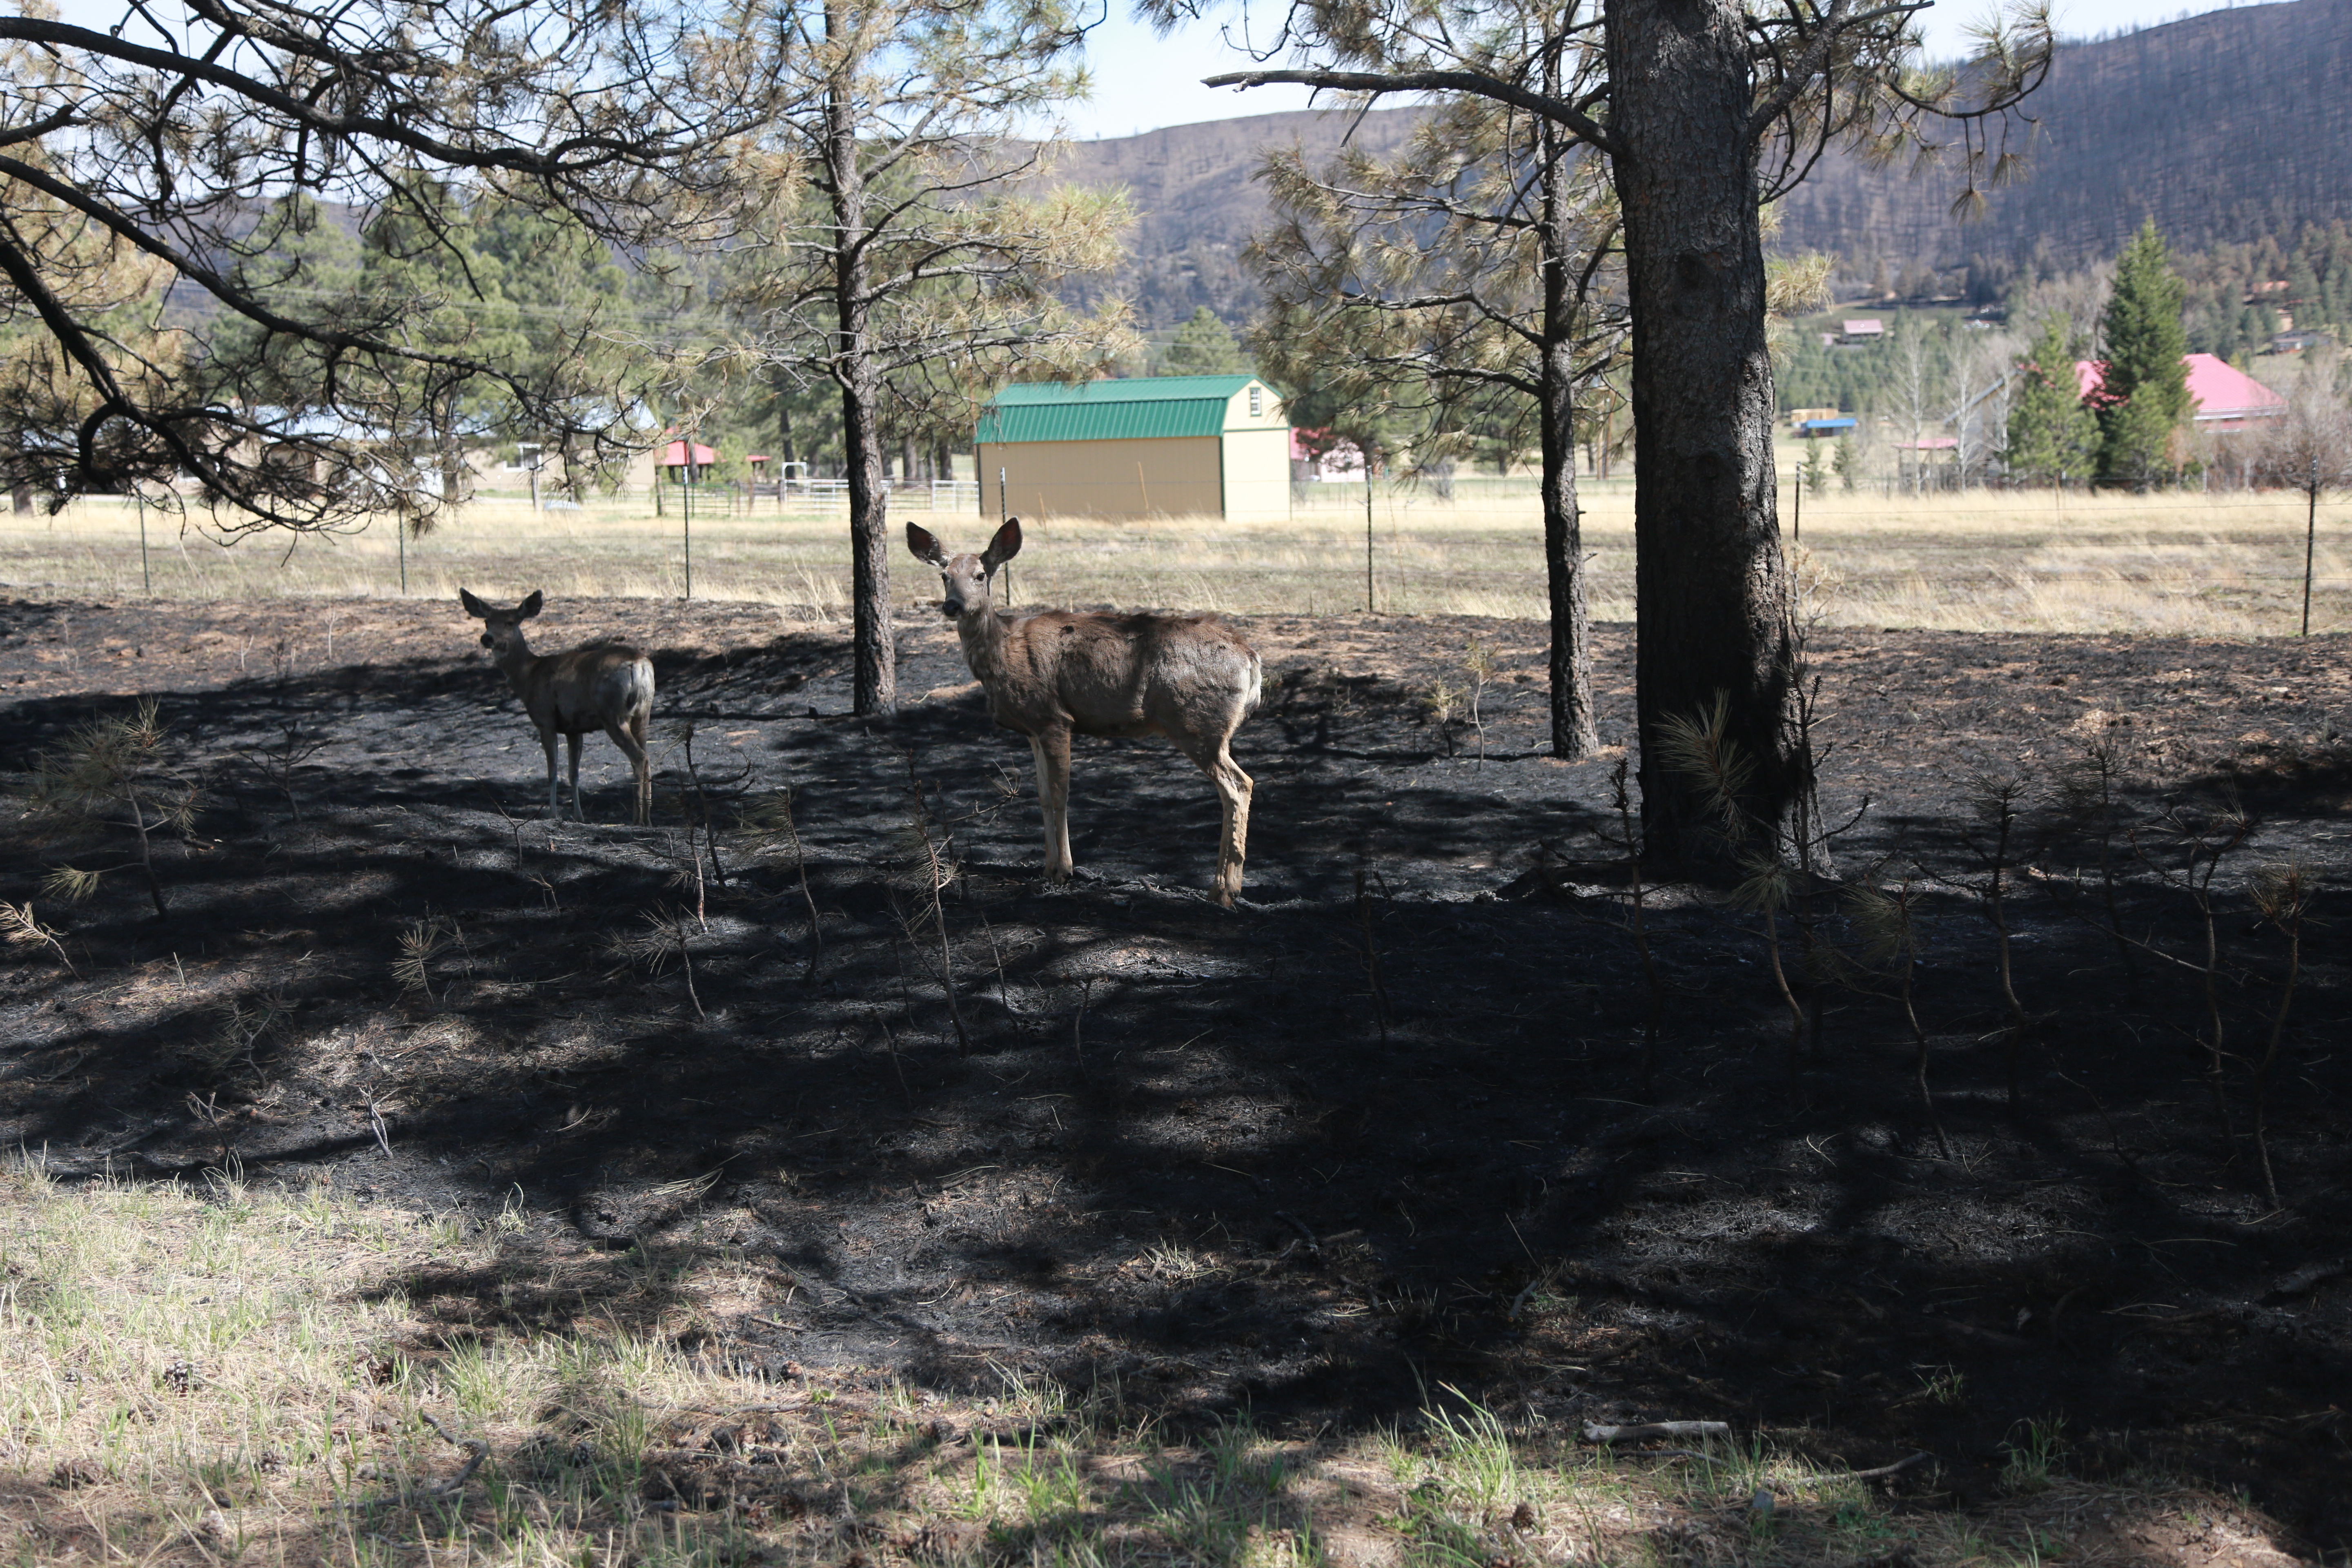 A pair of deer are seen grazing by a burn scar following a wildfire near Las Vegas, New Mexico